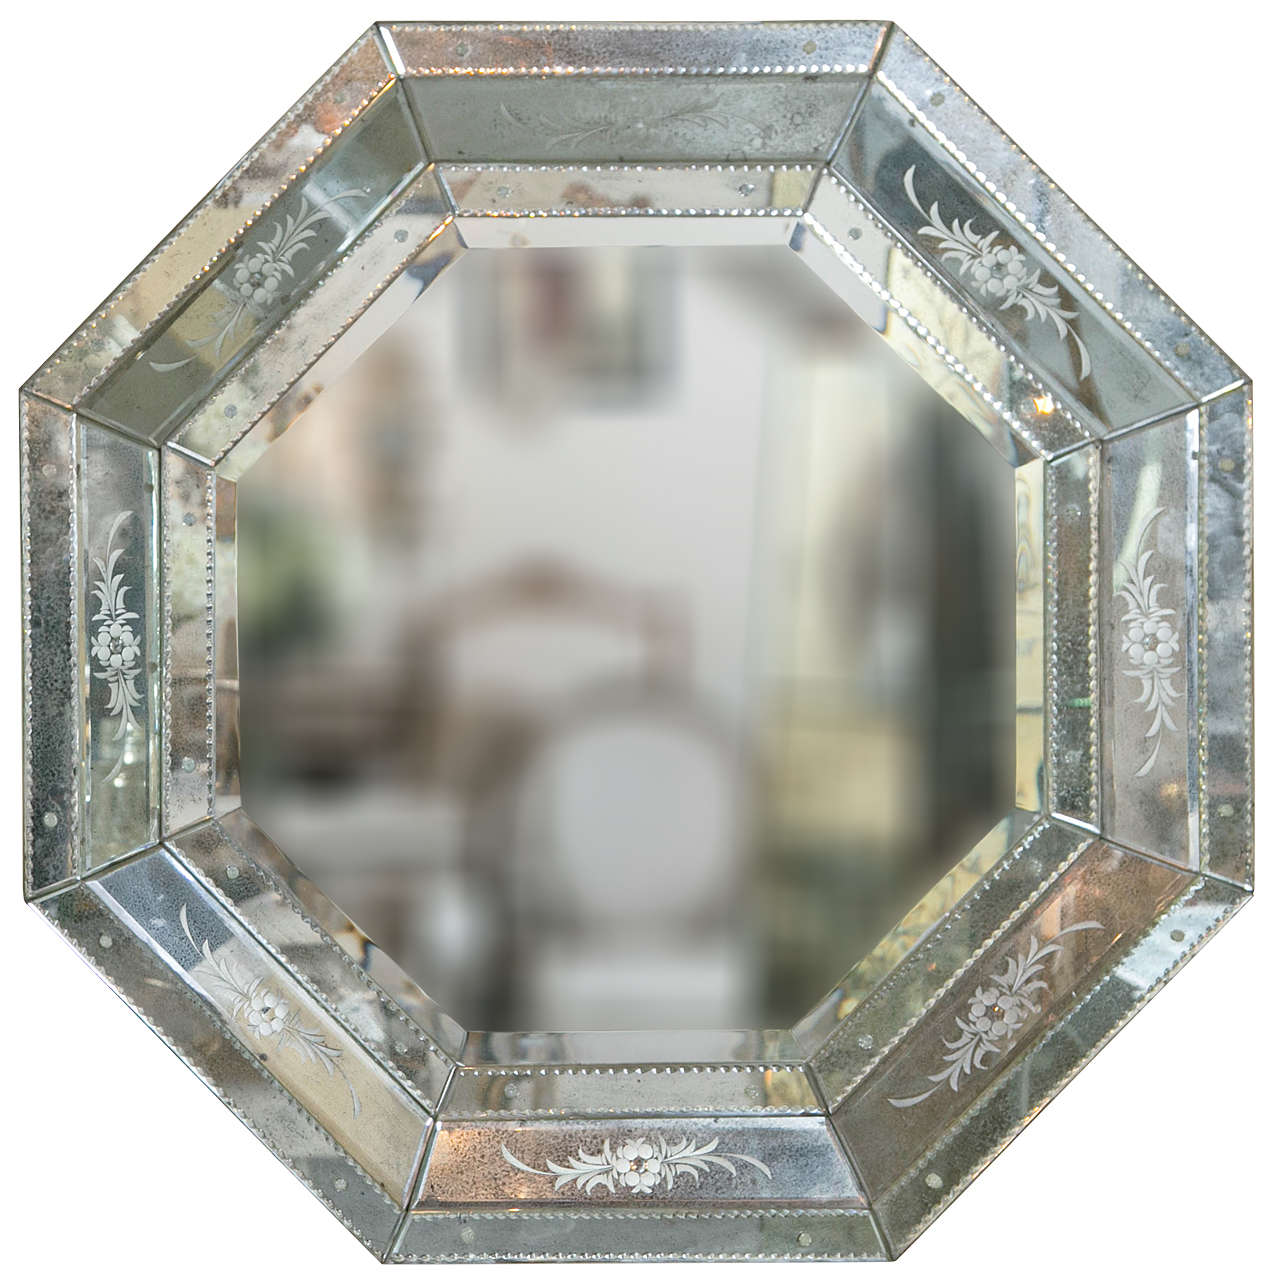 Pair of Venetian style Hollywood Regency mini octagon mirrors. These beautifully etched glass antiqued framed mirrors having several outer design frames over a central octagonal beveled mirror. The backs supported with wood and heavy metal hanging